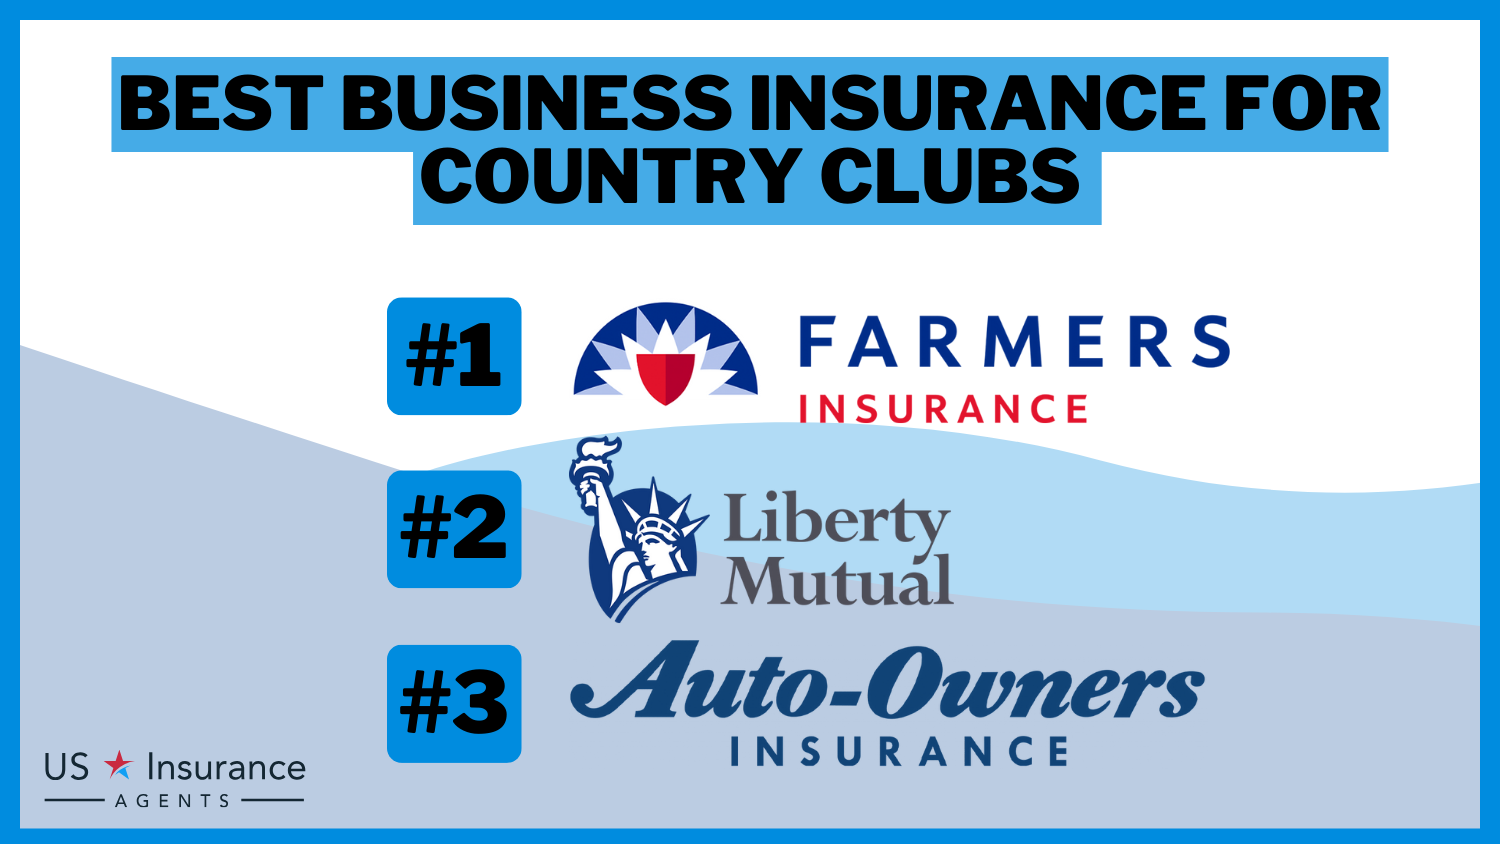 Farmers, Liberty Mutual and Auto-Owners: Best Business Insurance for Country Clubs